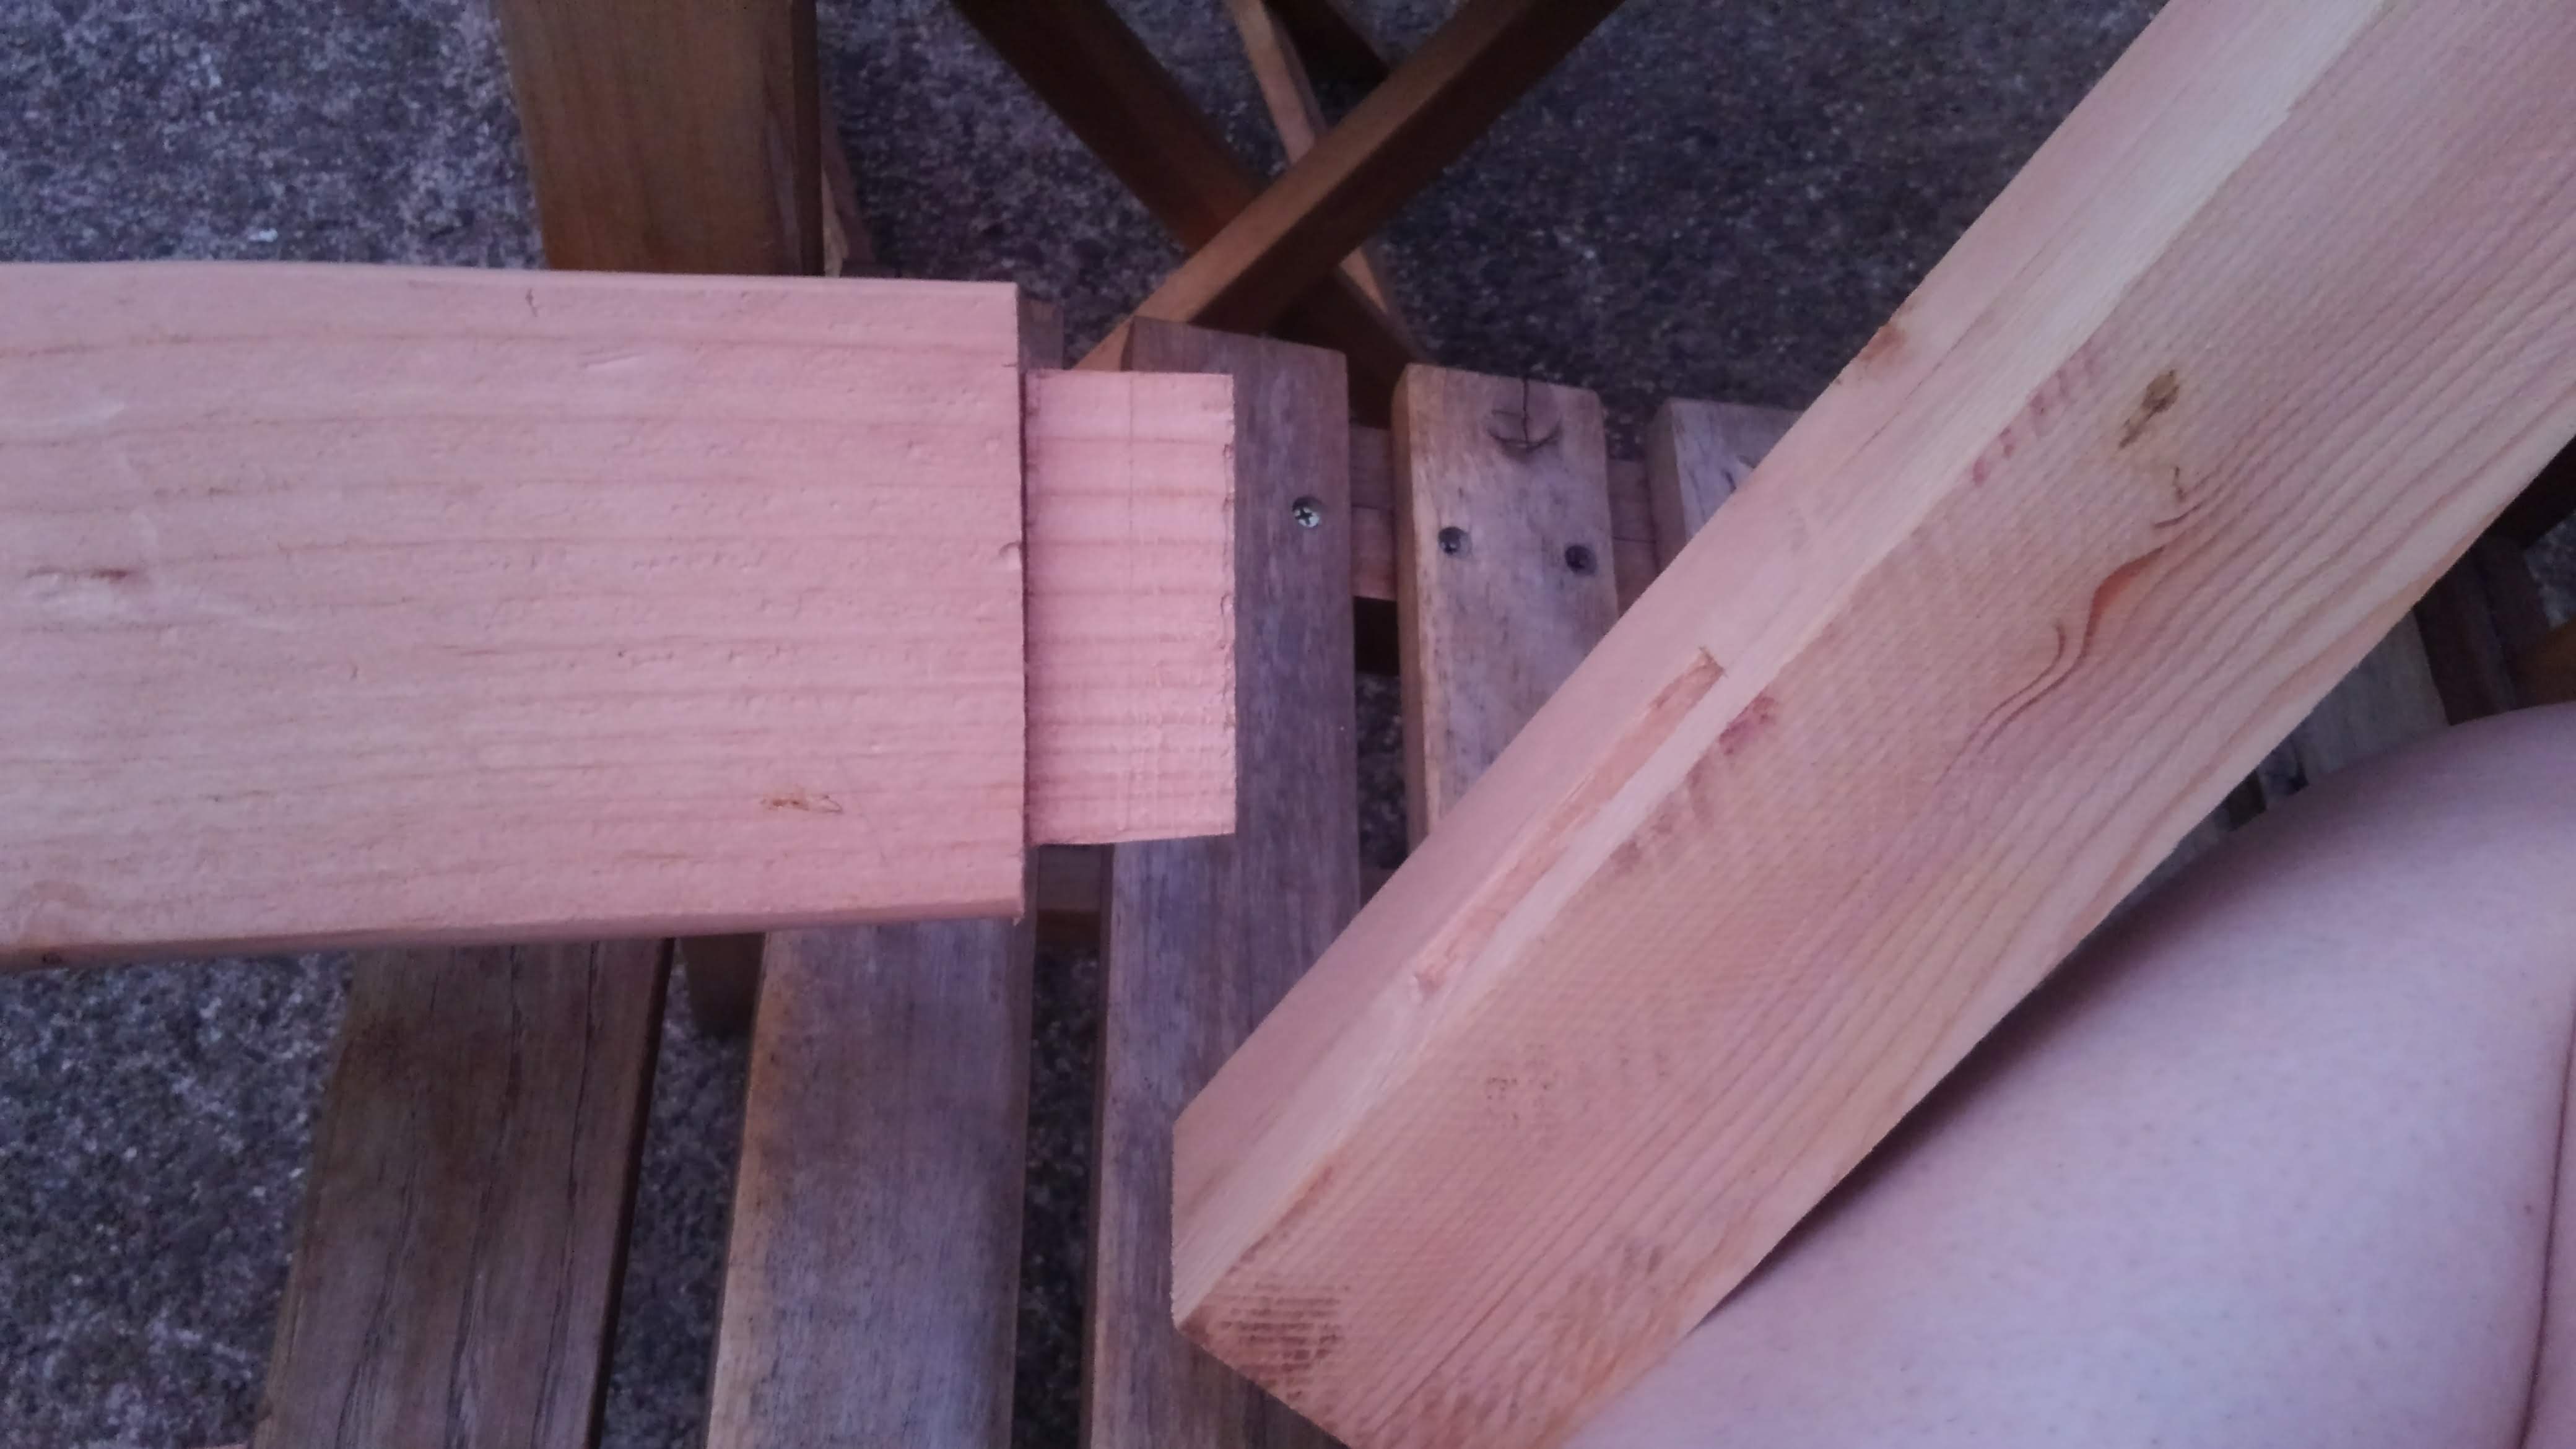 two pieces of wood, one with a tenon and the other with a mortise